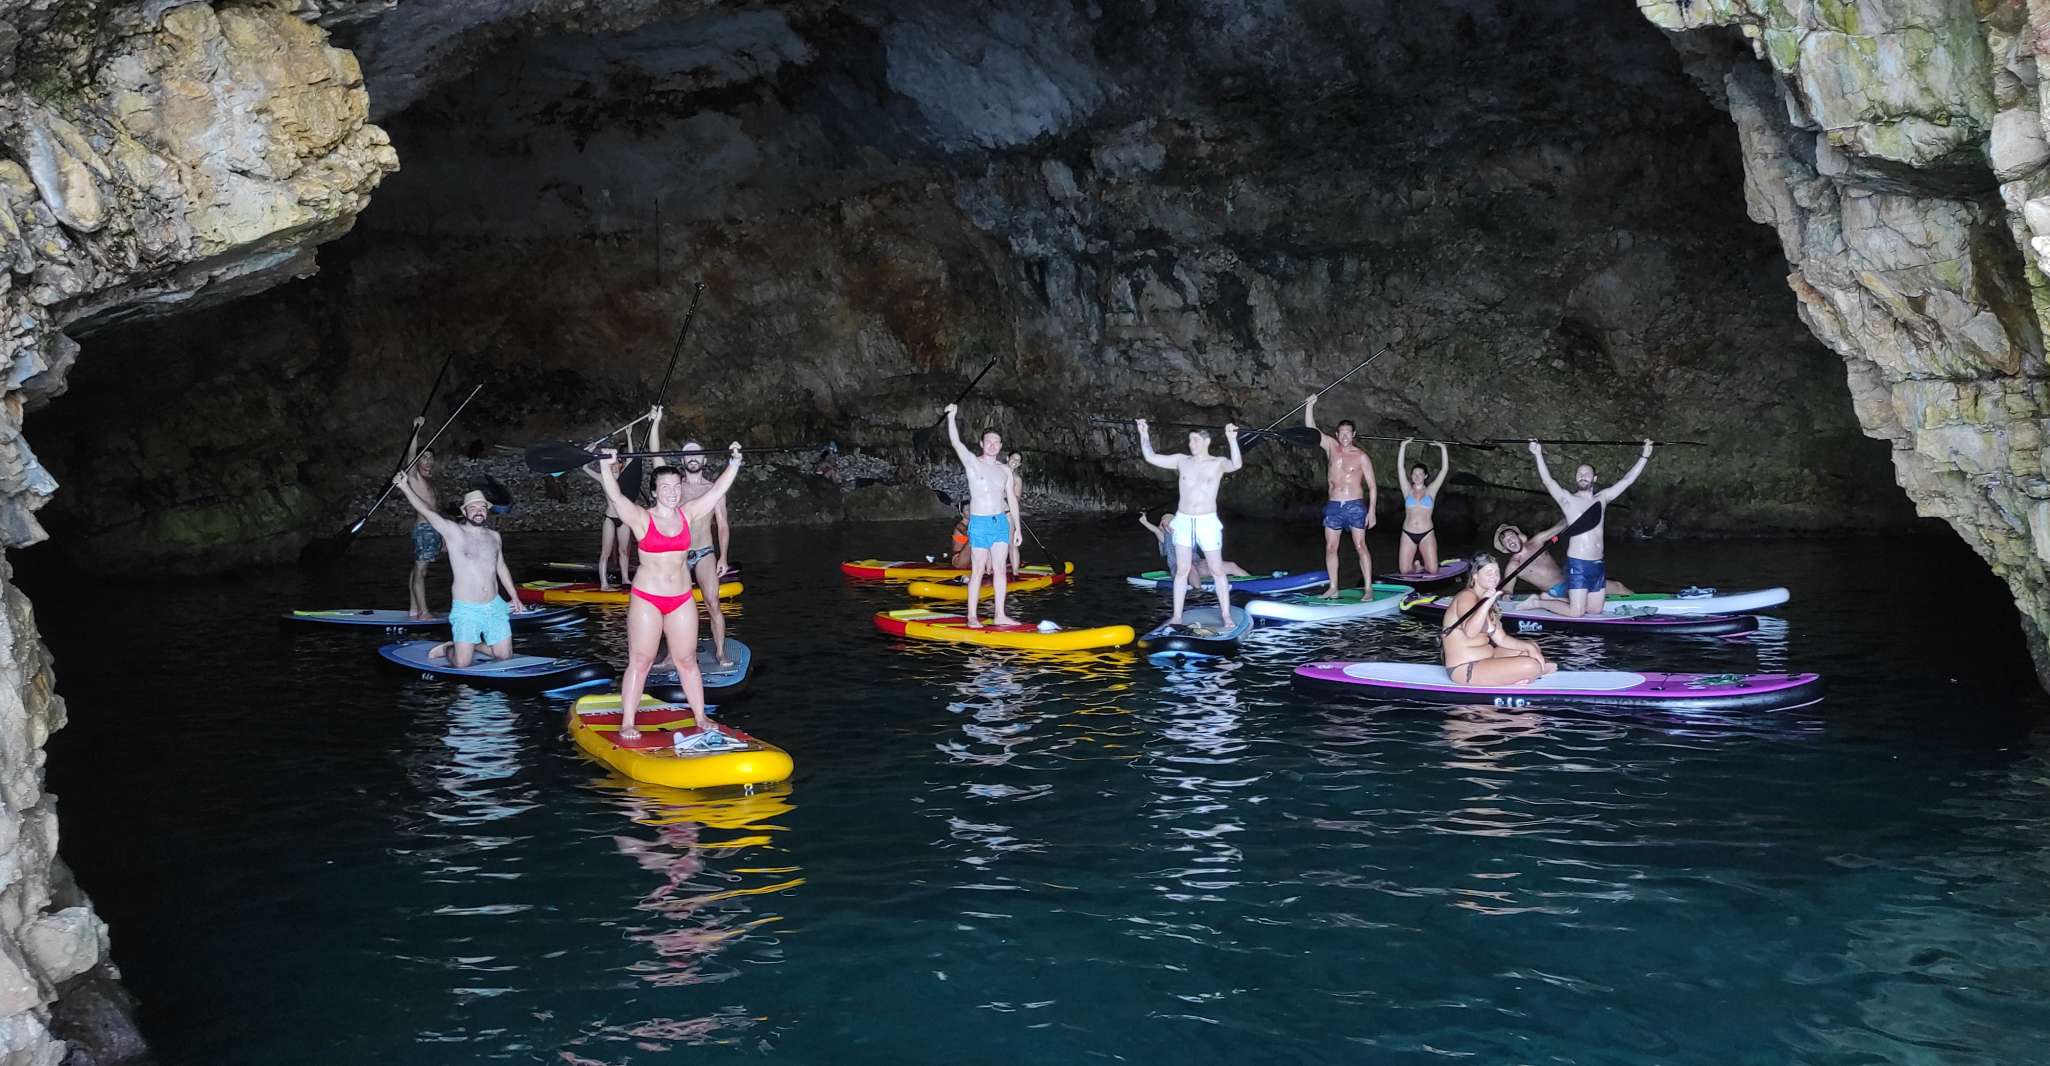 Polignano a Mare, Stand-Up Paddle Board Sea Cave Trip - Housity